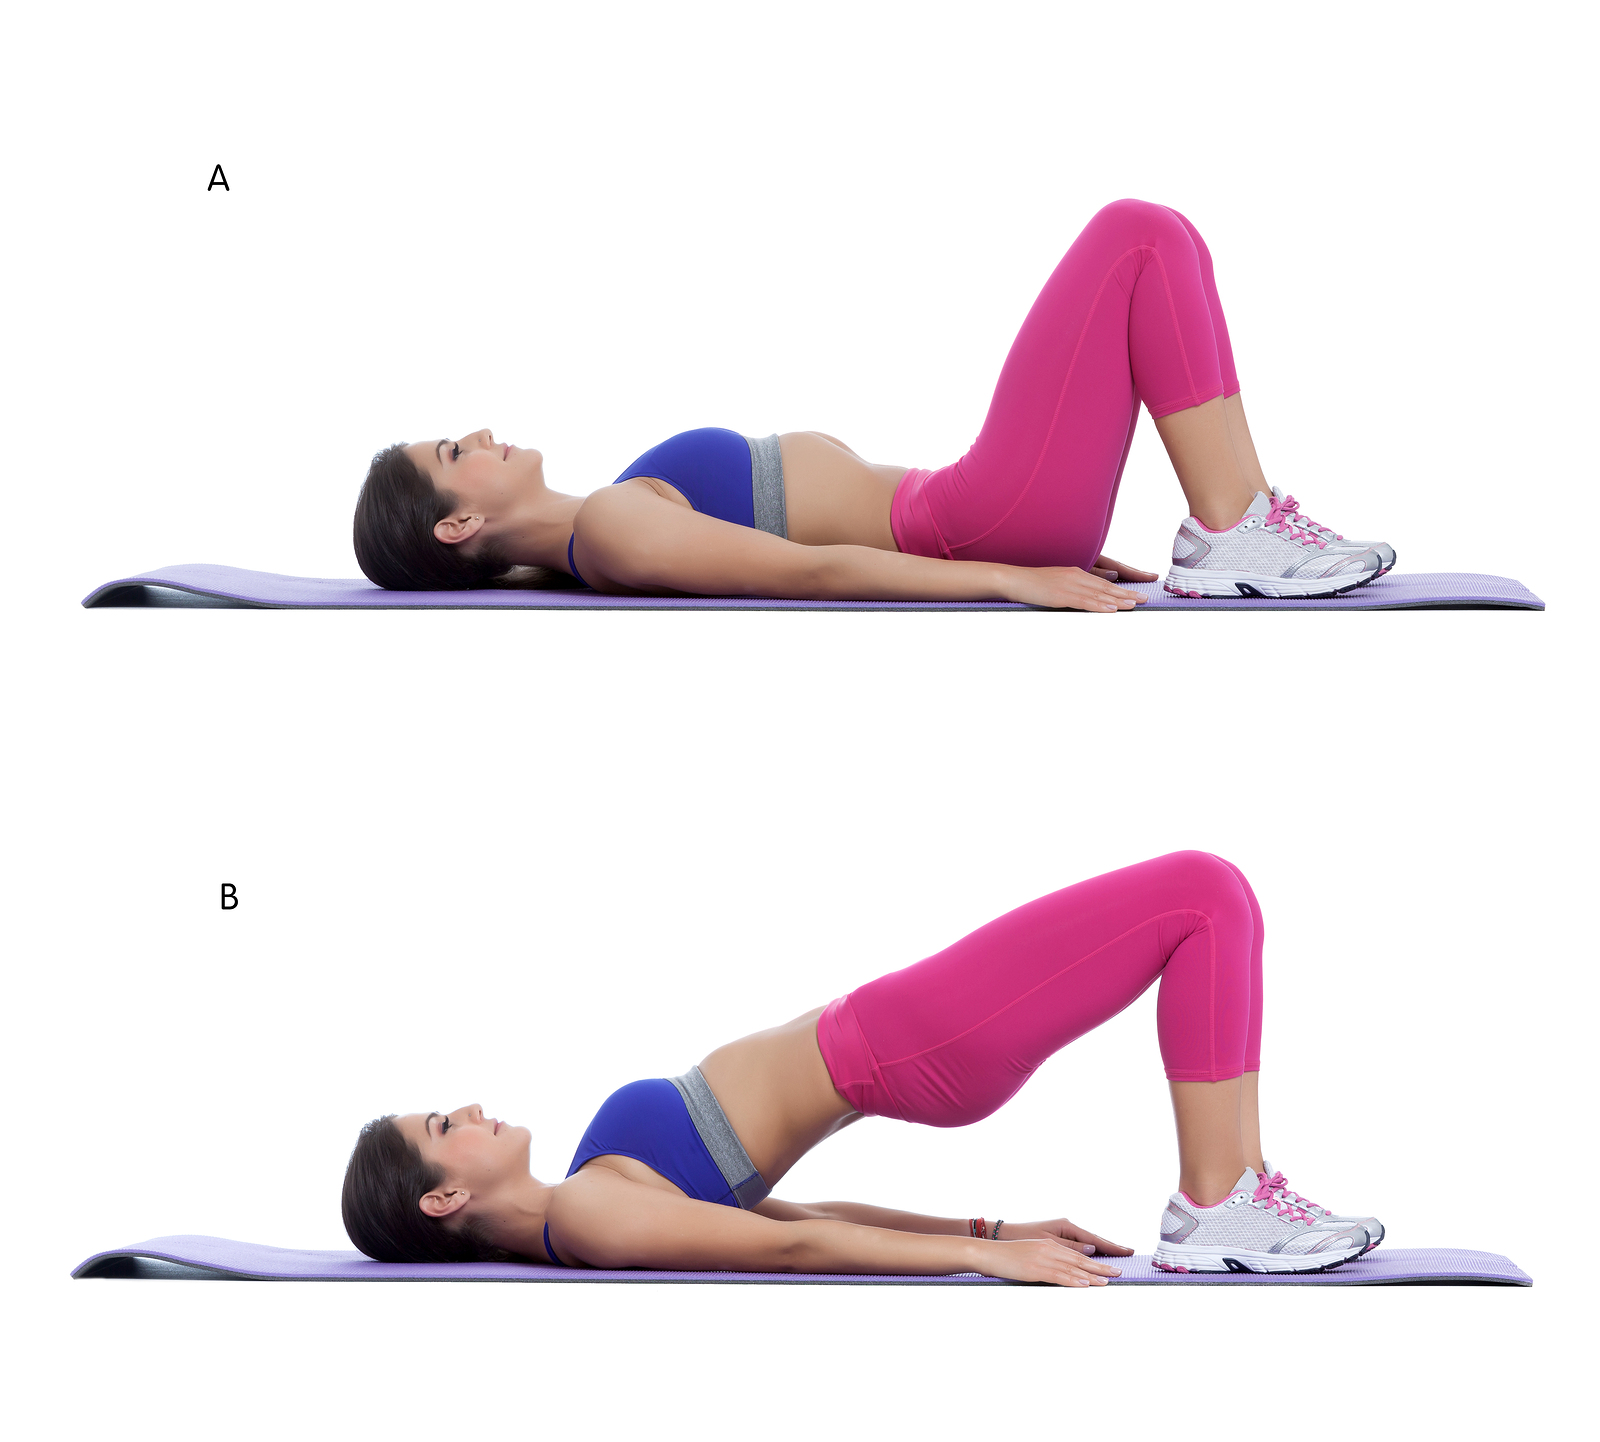 Step by step instructions: Lie on your back on the floor with your knees bent and your feet flat on the floor. (A) Now brace your core squeeze your glutes and raise your hips so your body forms a straight line from your shoulders to your knees (B)